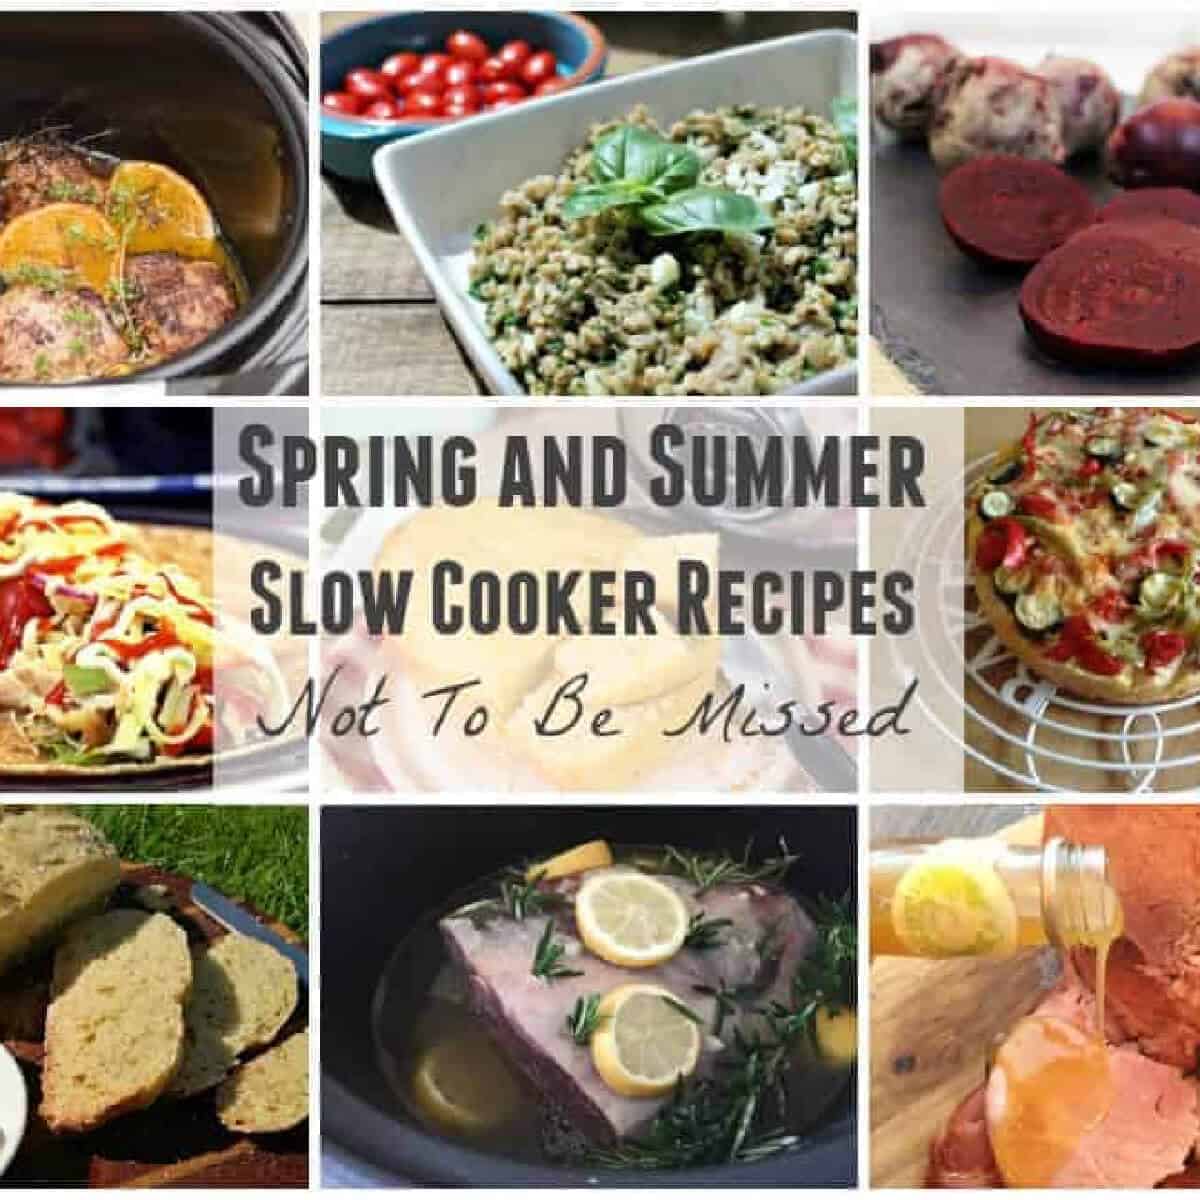 Collage of images of spring and summer slow cooker dishes.